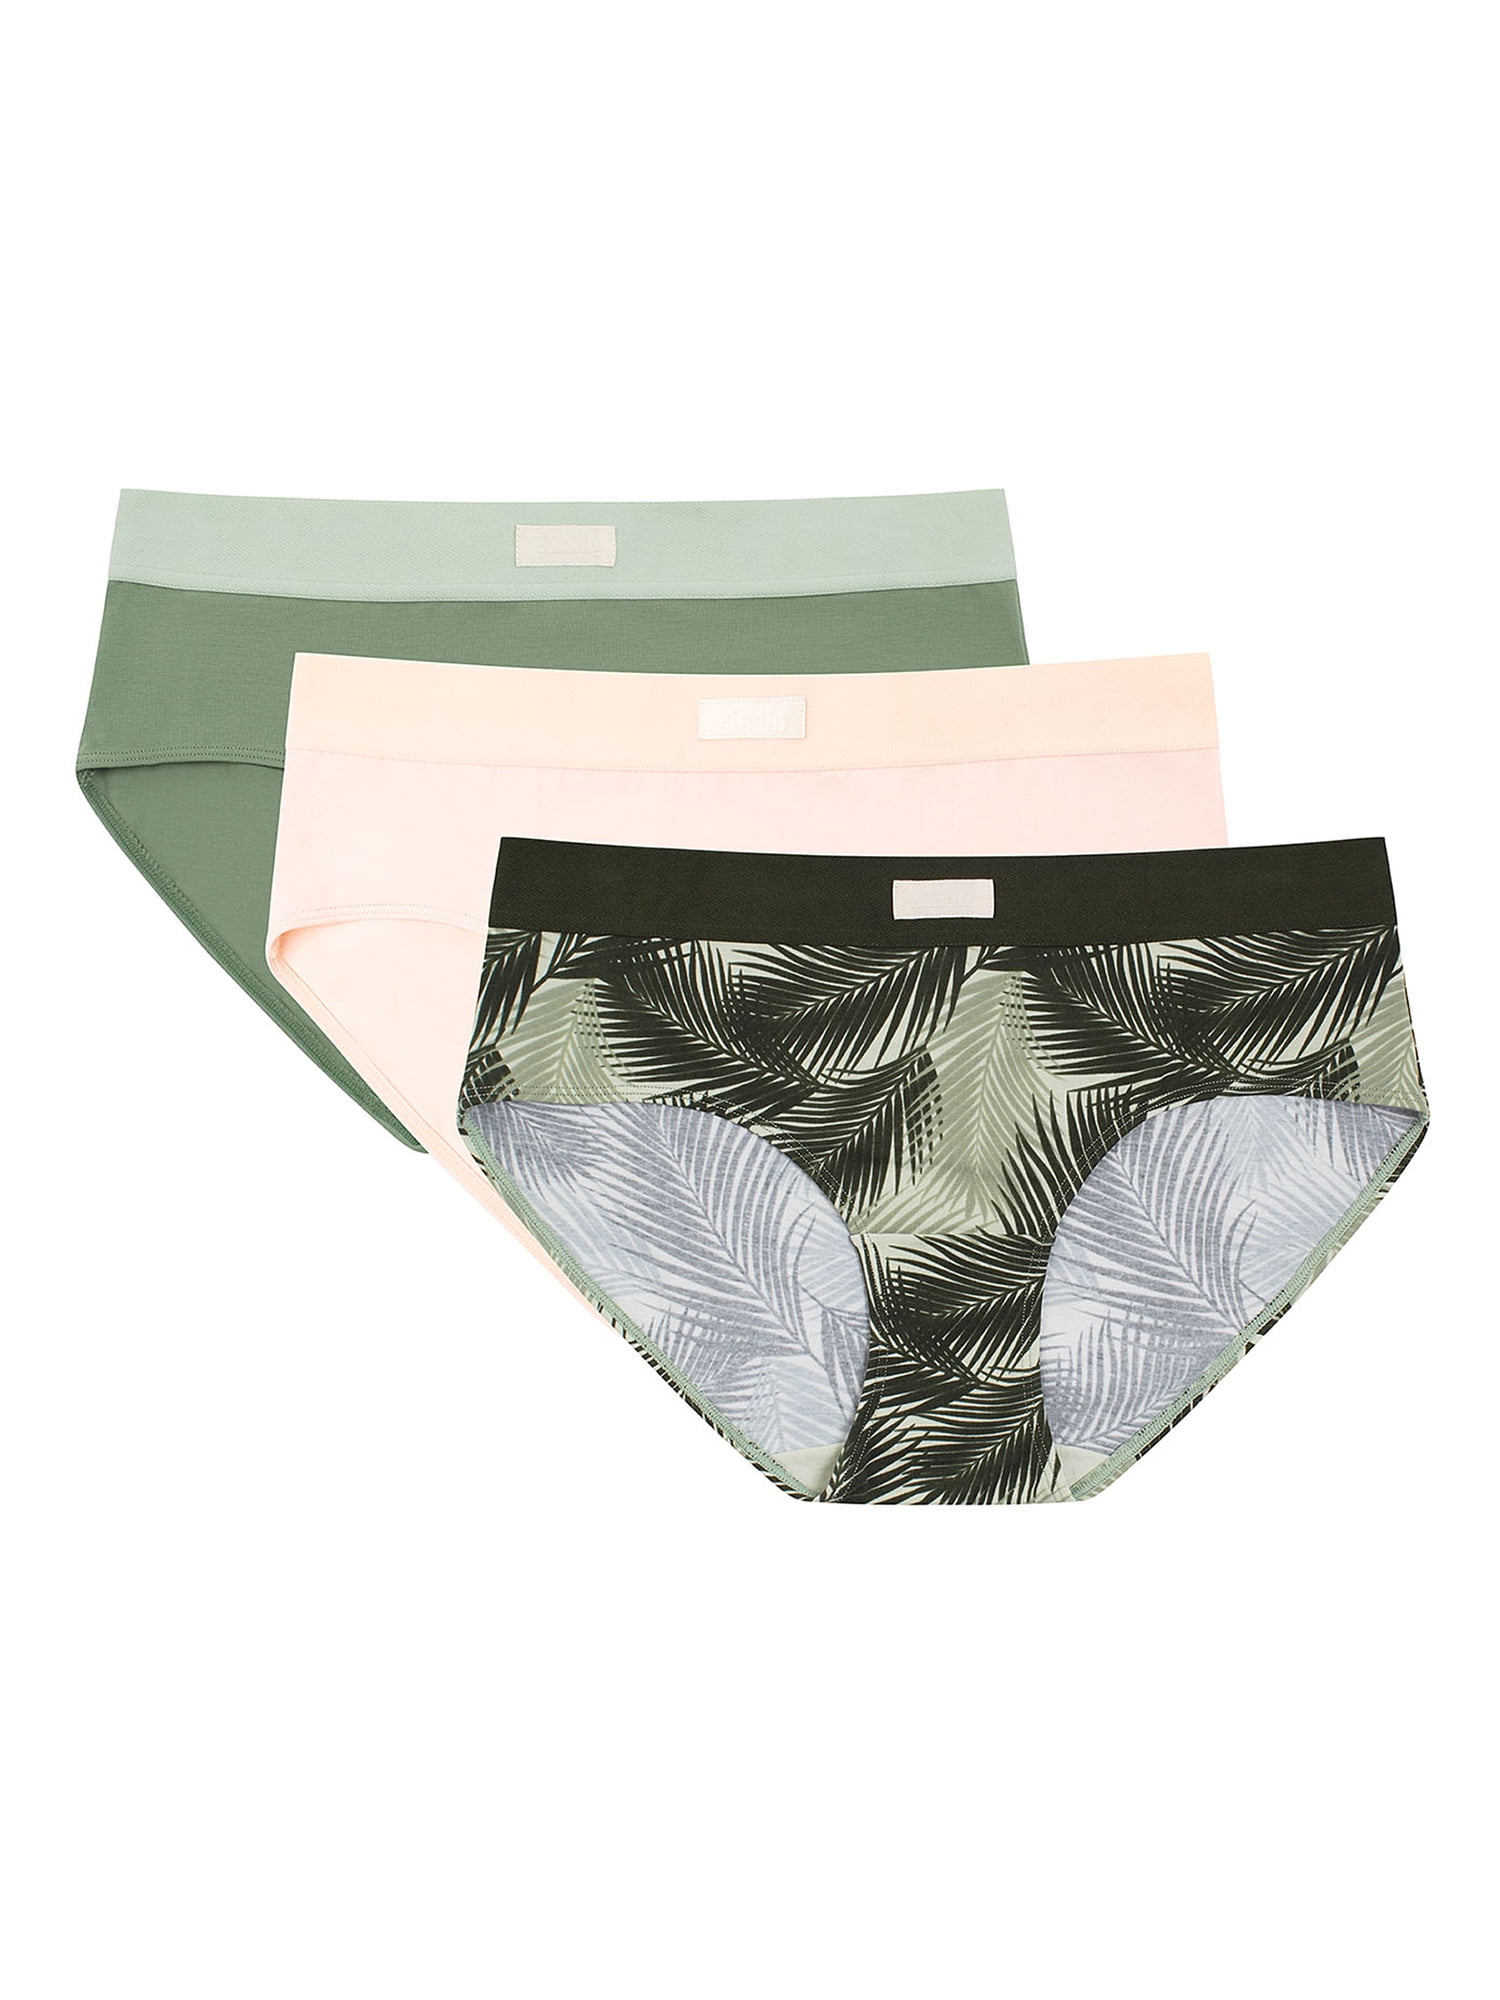 Kindly Yours Women's Cotton Hipster Panties, 3-Pack, Sizes XS to